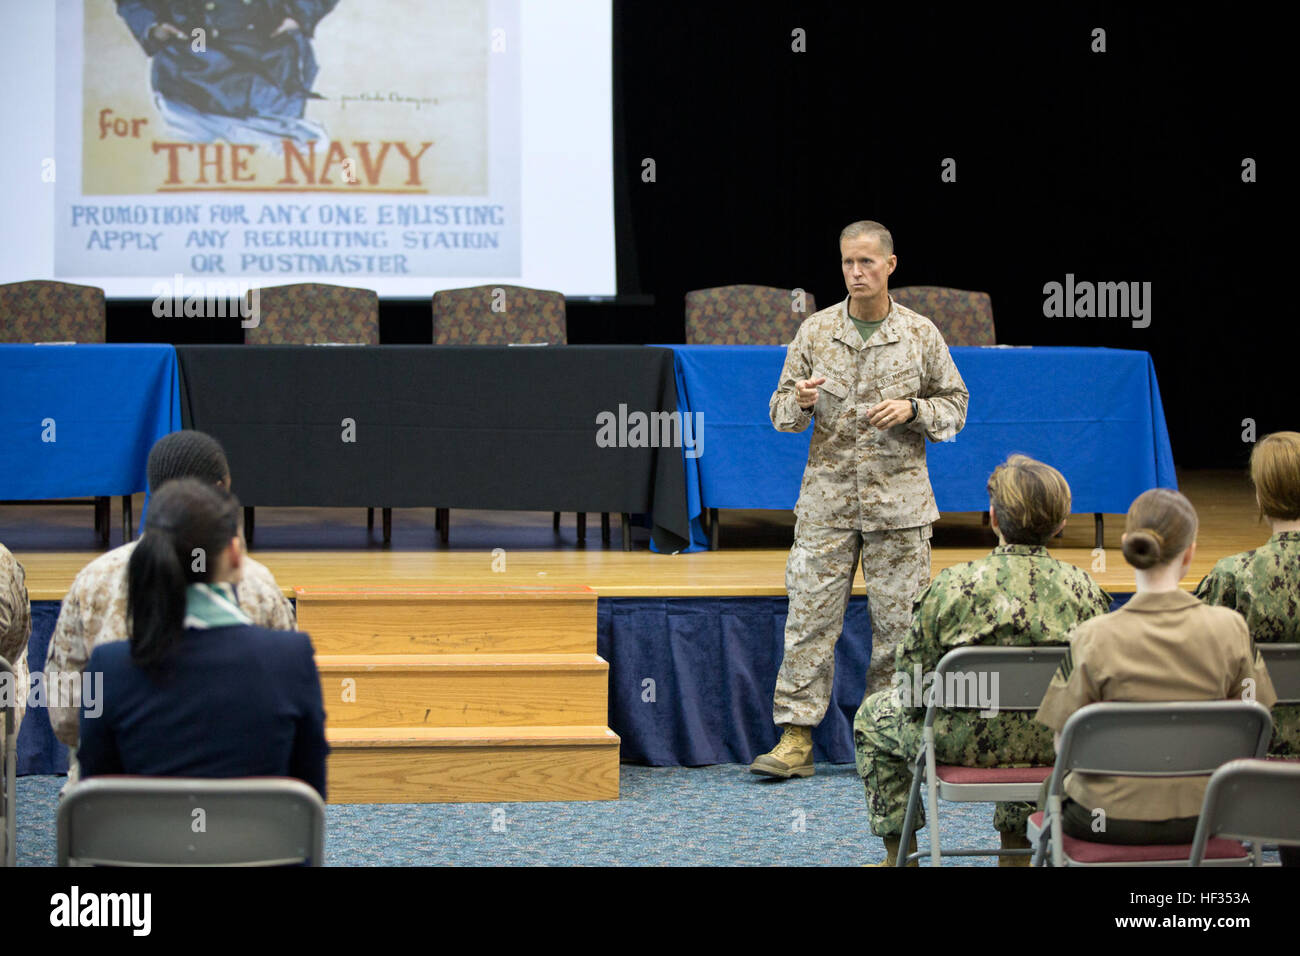 U.S. Marine Corps Maj. Gen. Carl E. Mundy III, commanding general, Command Element Marine Forces Central Command Forward, speaks at the 2015 Women's History Symposium aboard Naval Support Activity Bahrain, March 26, 2015. The symposium was held to discuss the role and achievements of women in the military and U.S. Department of State. (U.S. Marine Corps photo by Cpl. Sean Searfus CE MARFOR CENTCOM FWD COMCAM / Released) CE MARFOR CENTCOM FWD Women's History Symposium 150326-M-VH365-001 Stock Photo